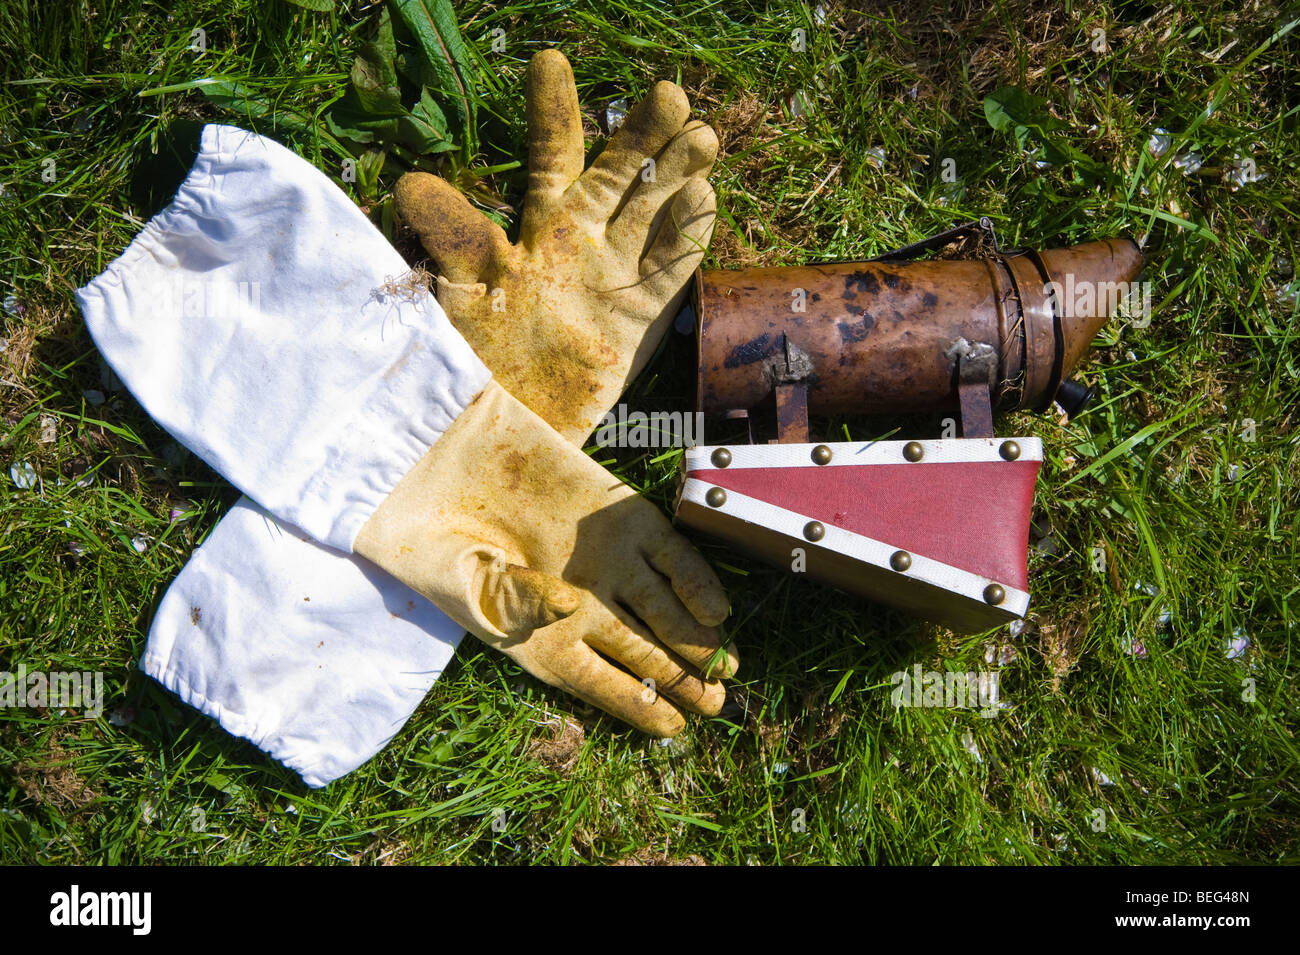 Bee keeper gloves and smoker in an orchard, Sandford. North Somerset, England. Stock Photo